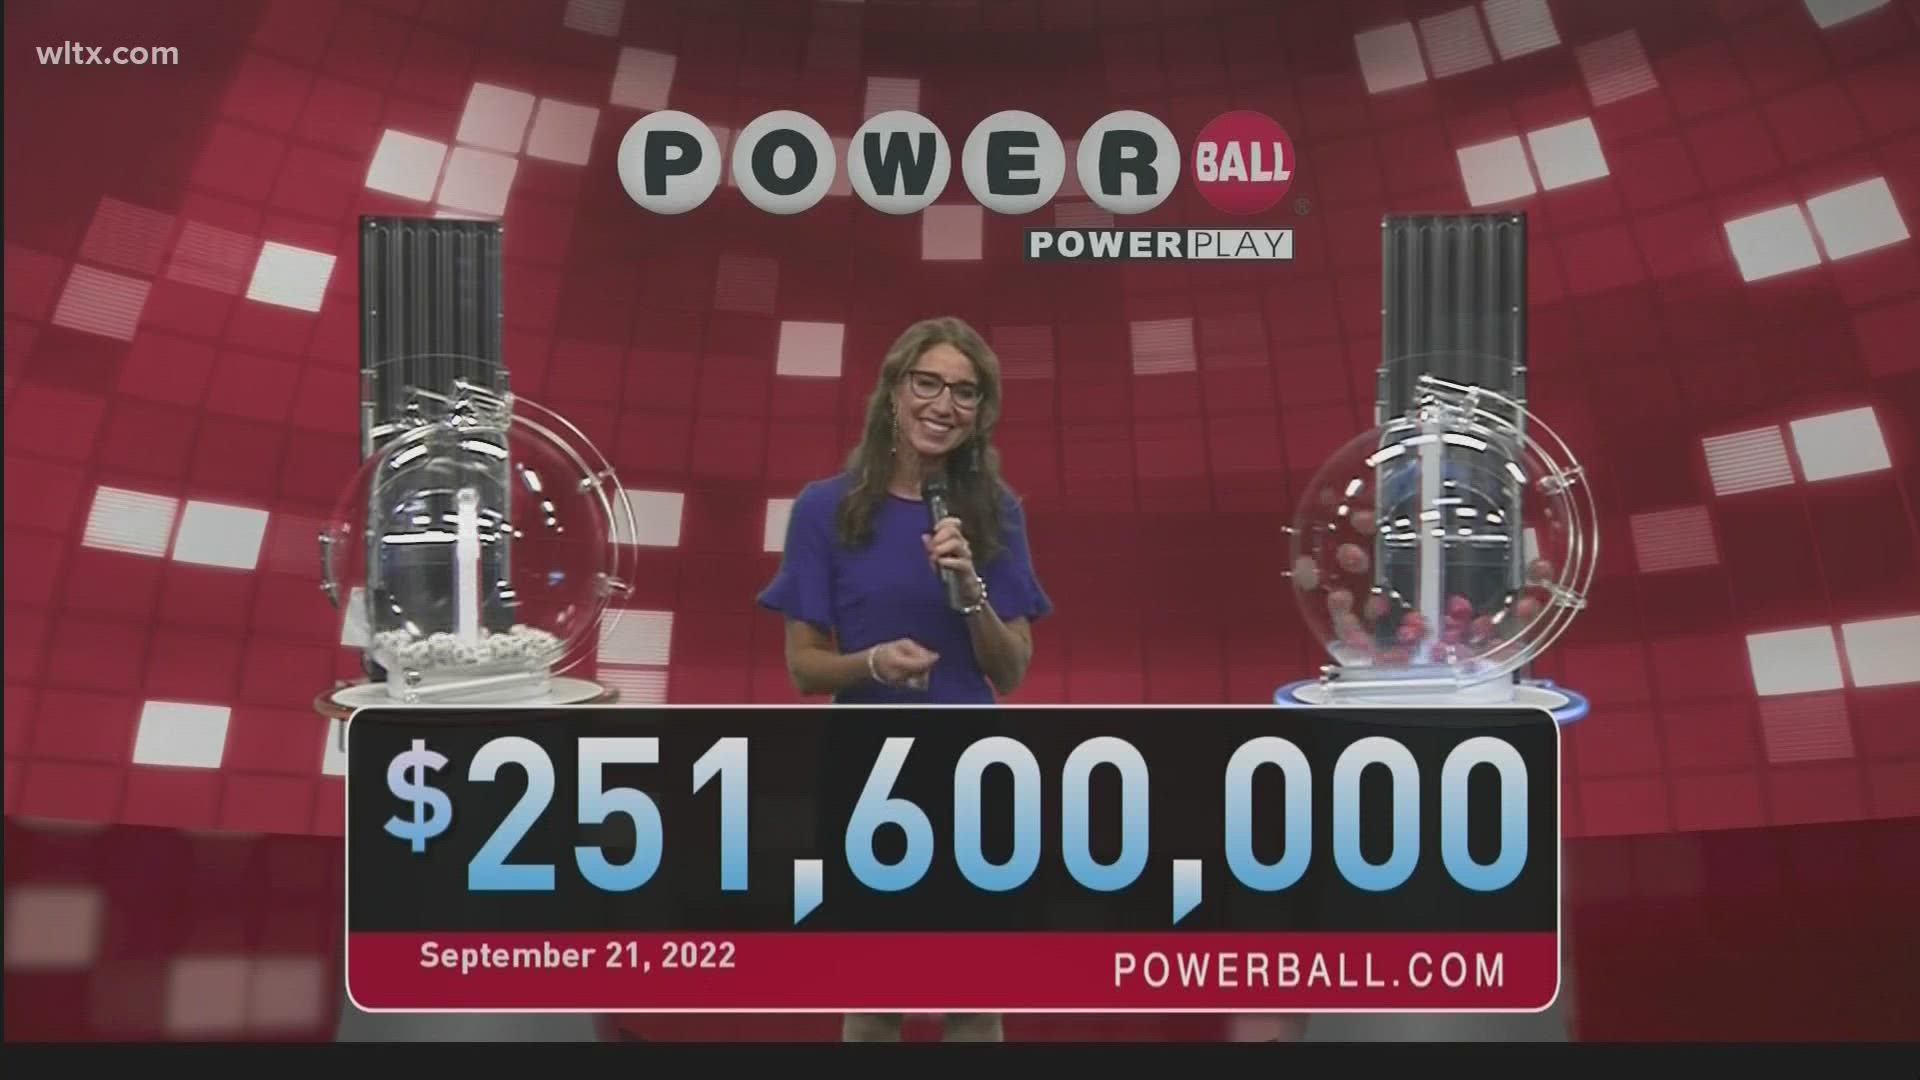 Here are the winning Powerball numbers for Wednesday, September 21, 2022.